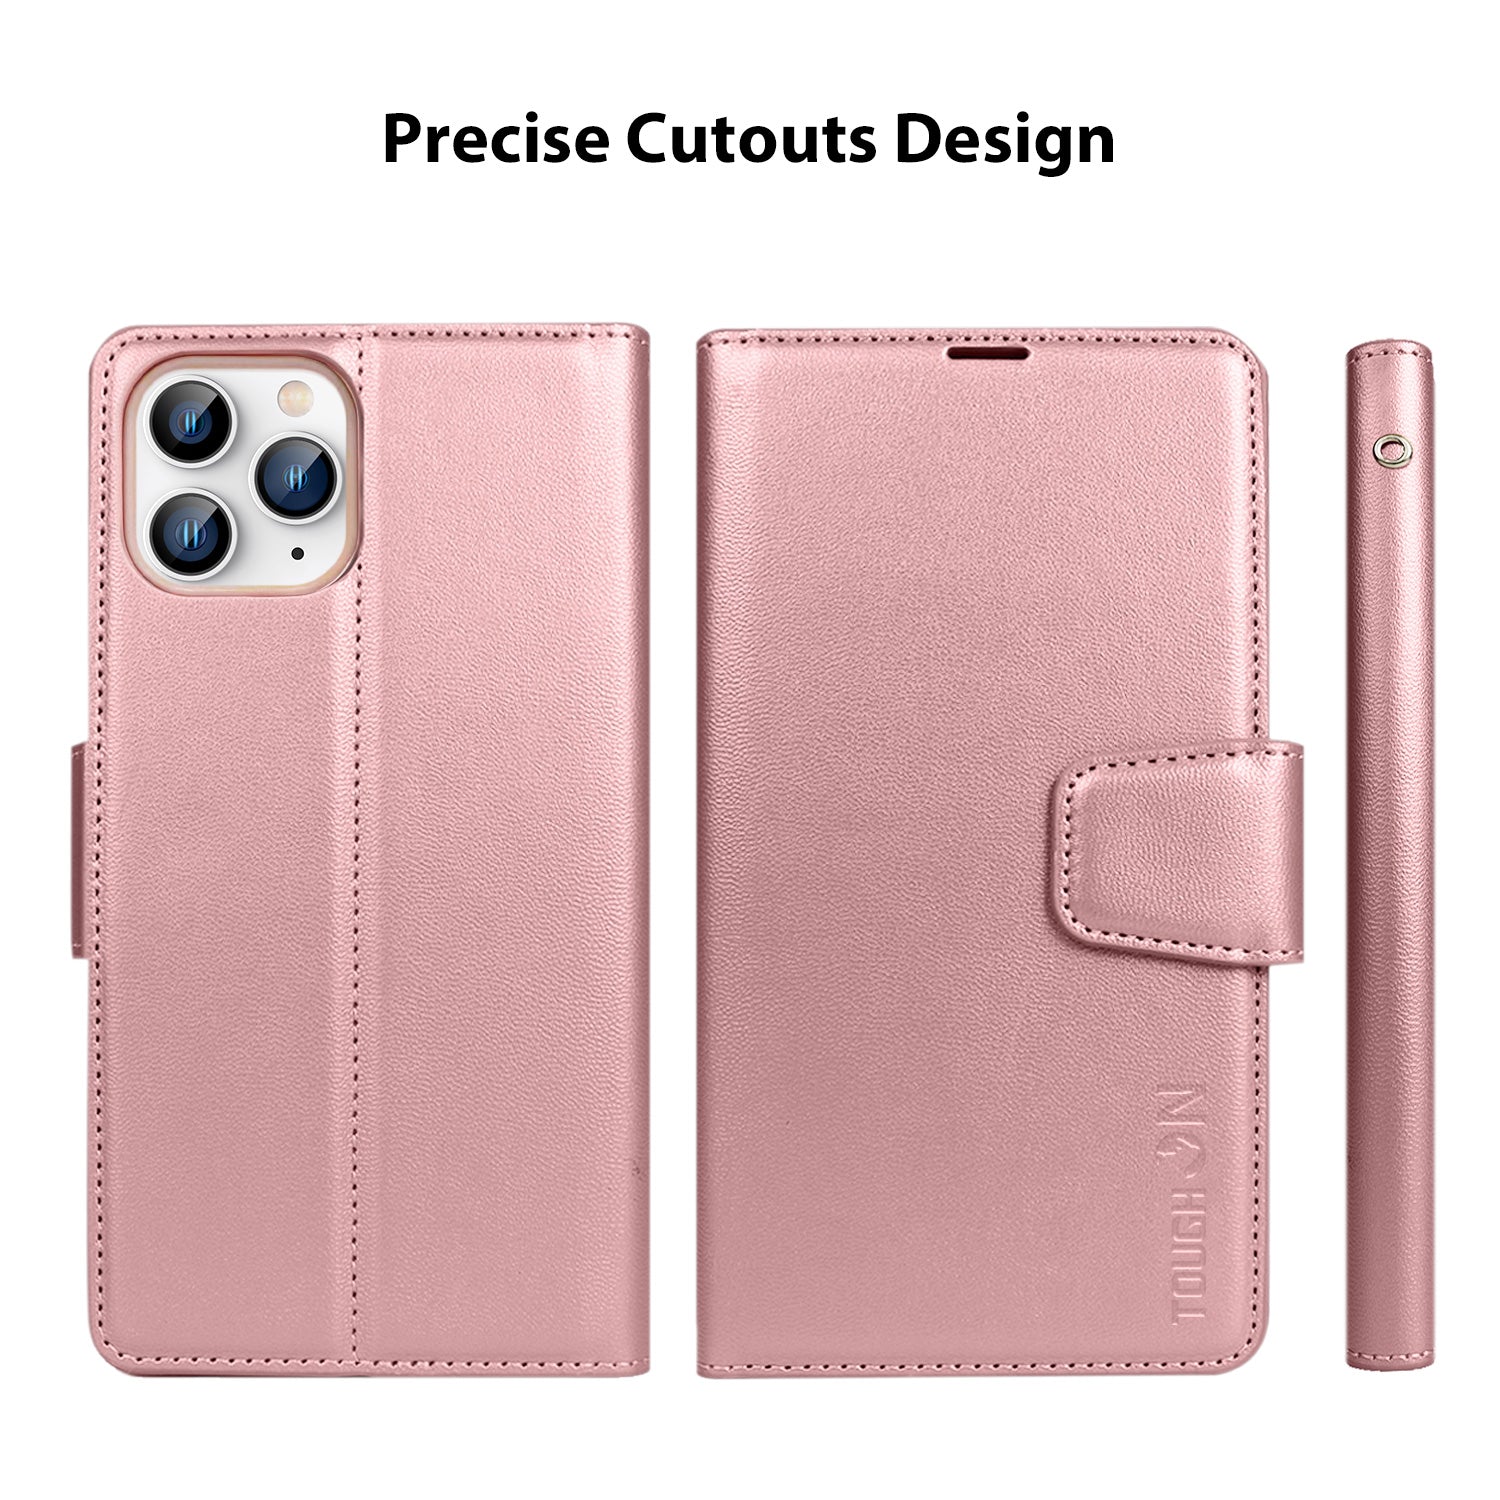 Tough On iPhone 11 Pro Max Case Leather Wallet Cover Rose Gold